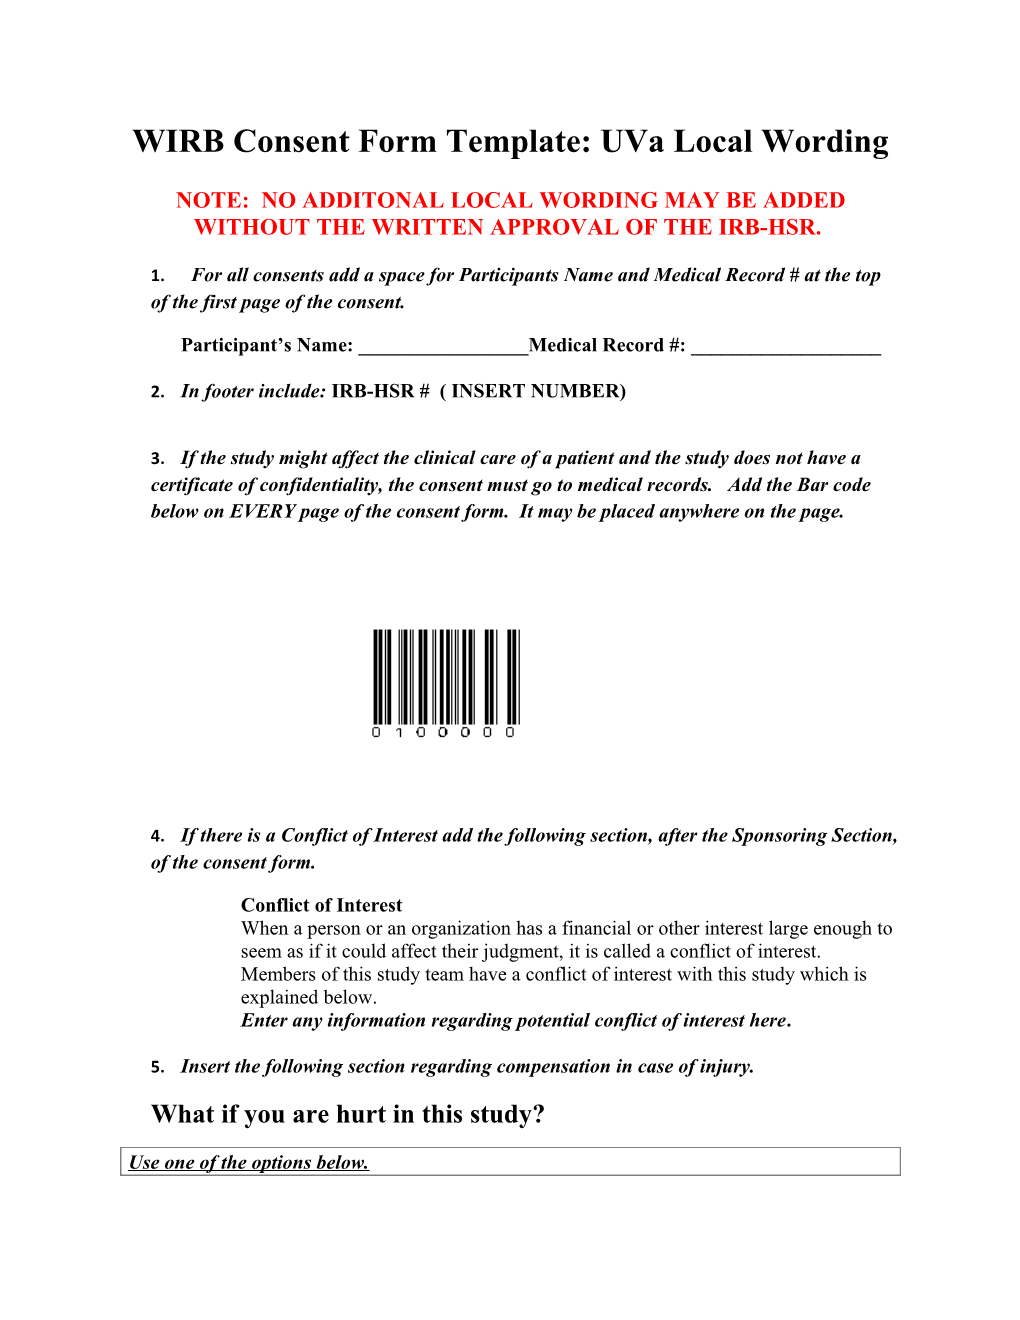 WIRB Consent Form Template: Uva Local Wording